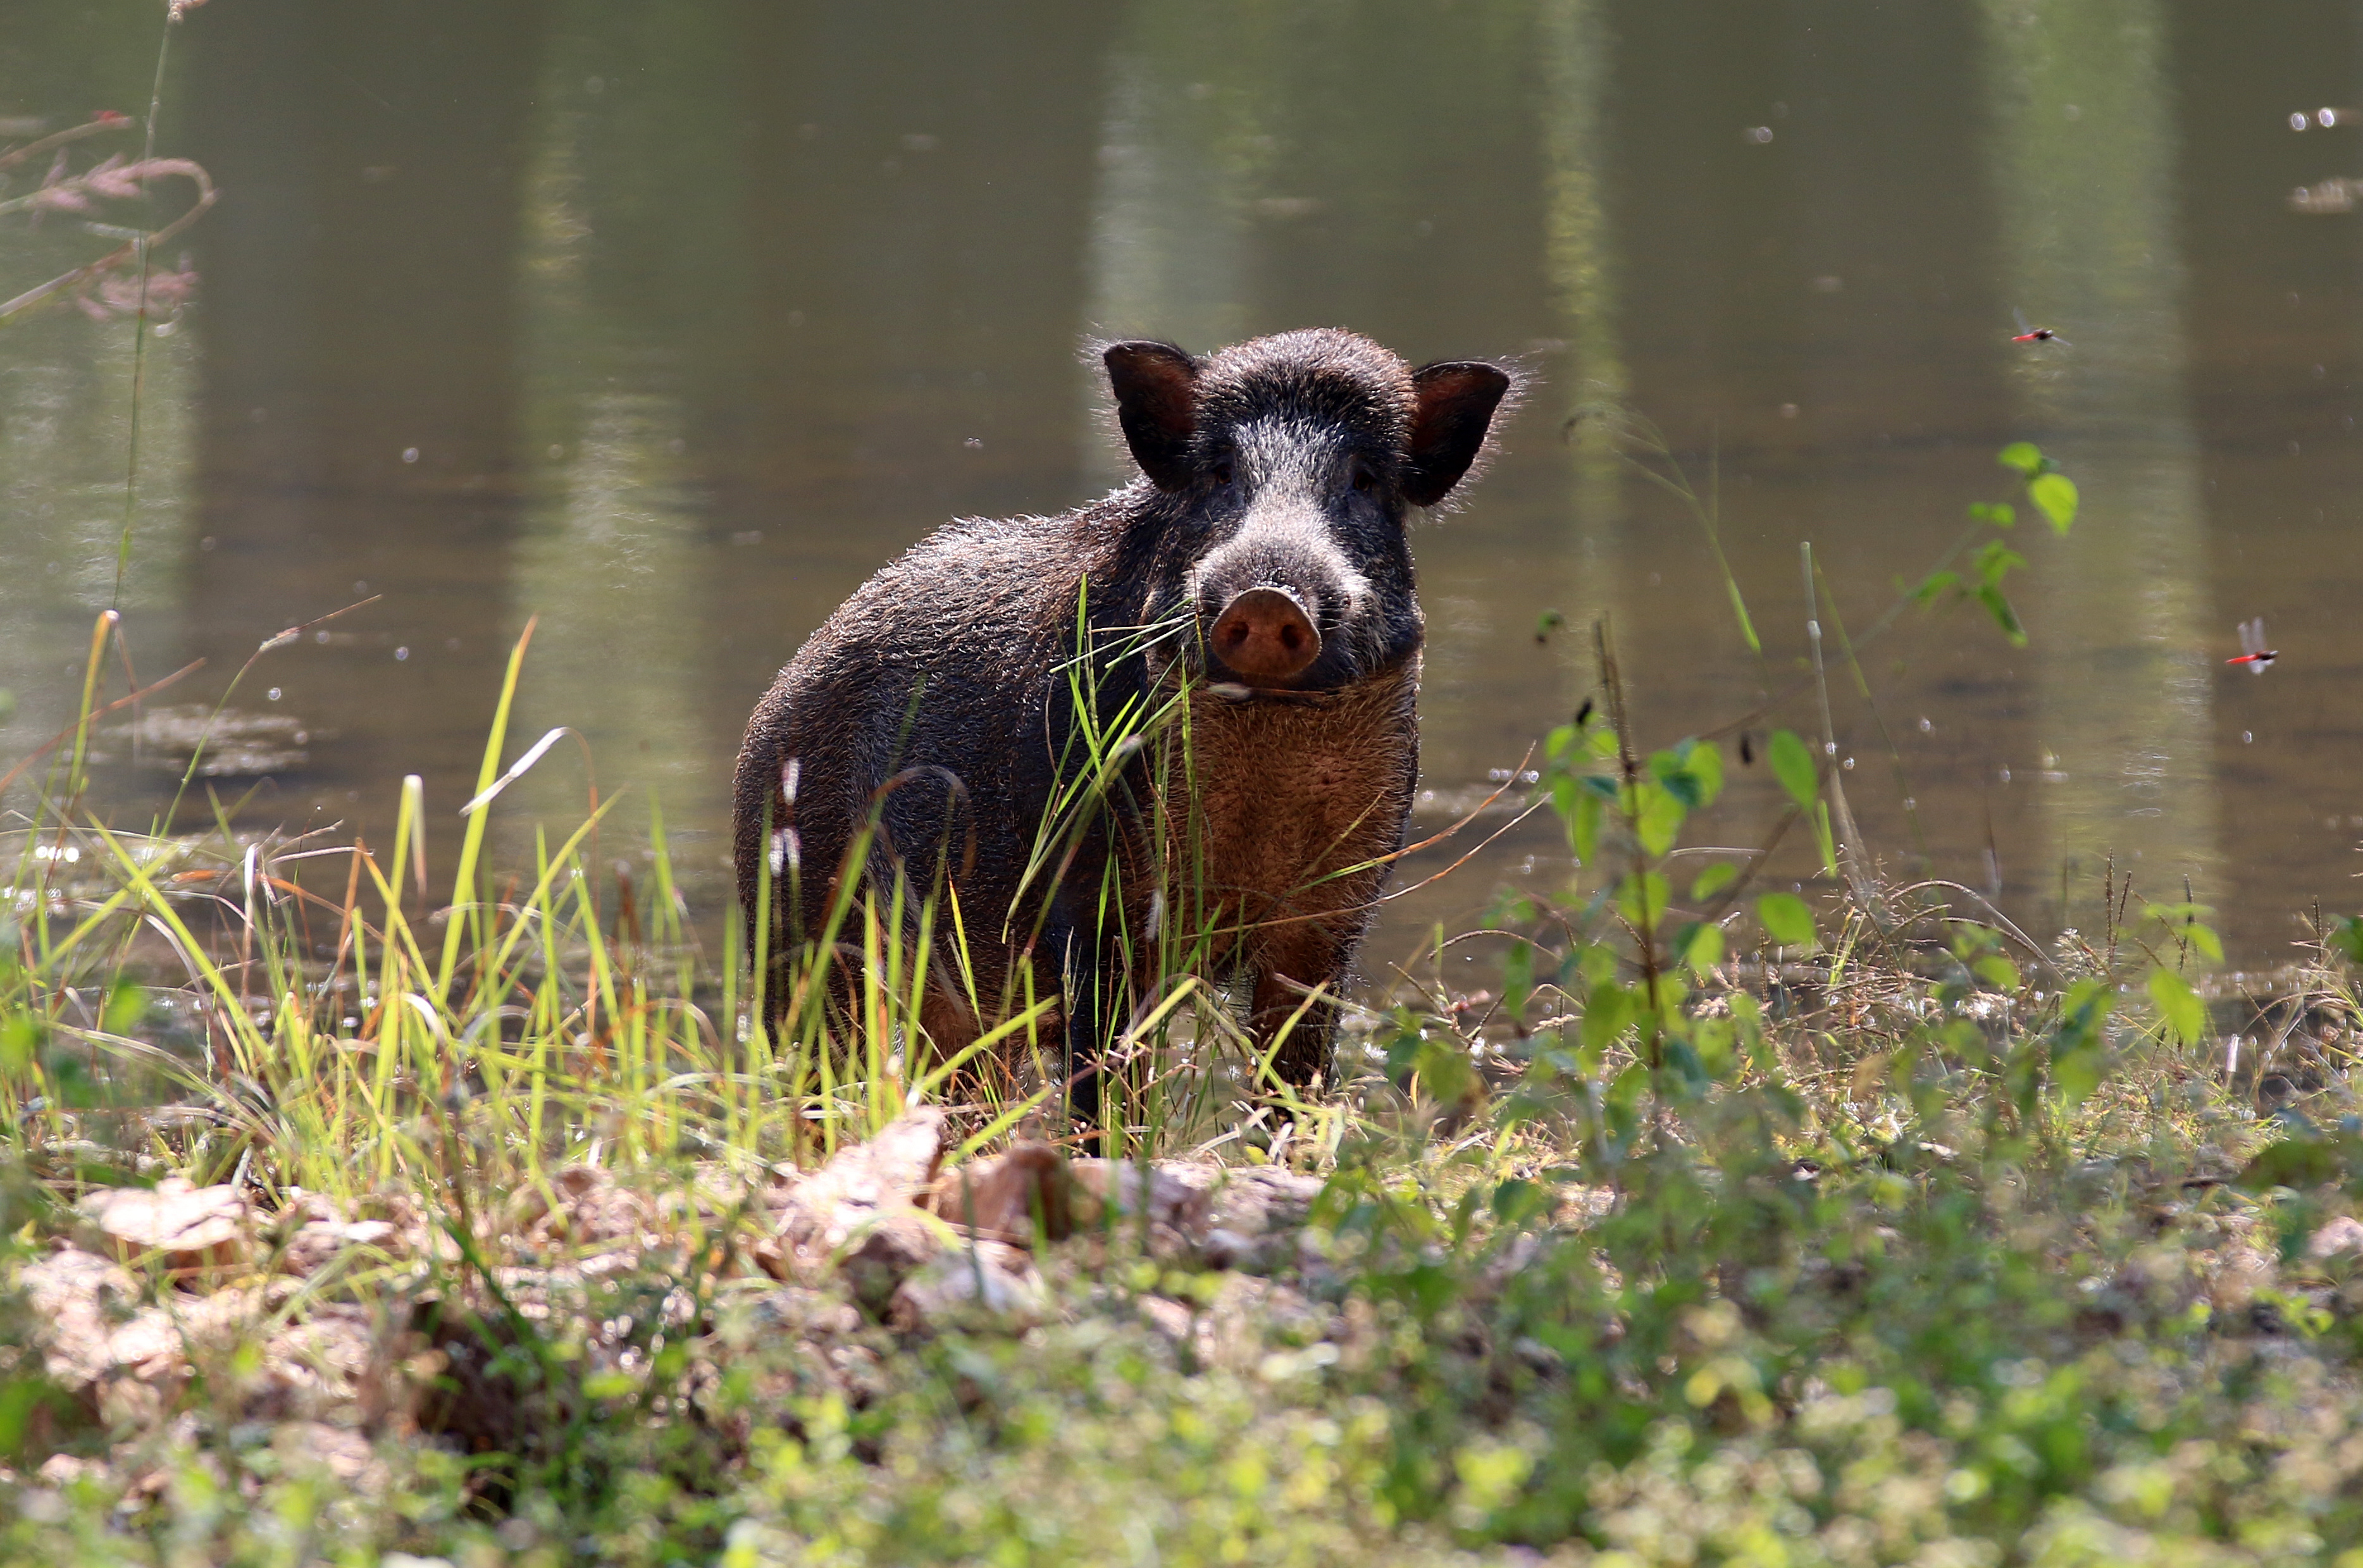 pig stands by a river in rural India